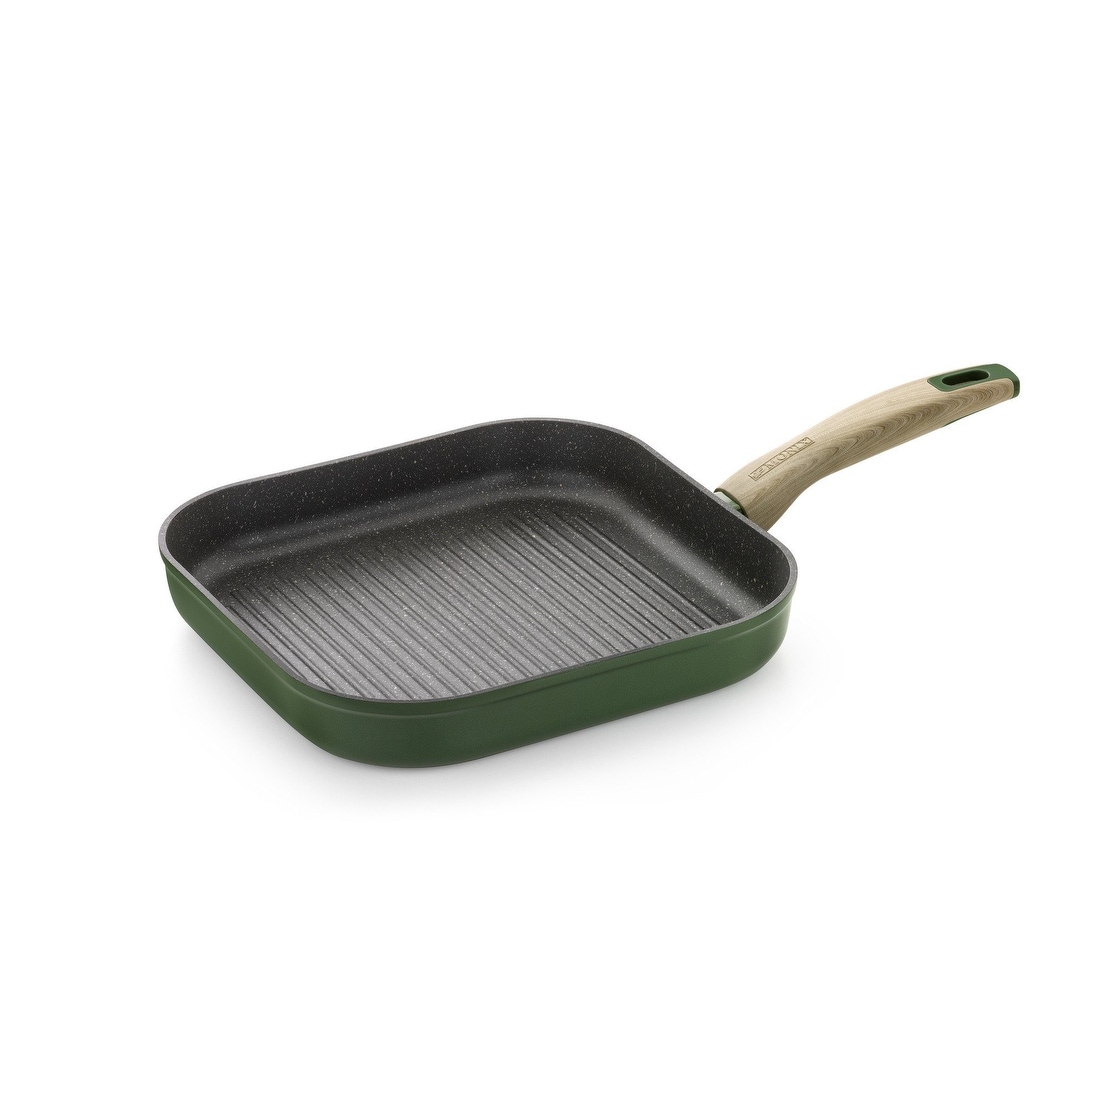 https://ak1.ostkcdn.com/images/products/is/images/direct/a03753dbb2e01424cfabe4c0e752f918b09e109d/Monix-11%22-Amazonia-Non-Stick-Grill-Pan.jpg